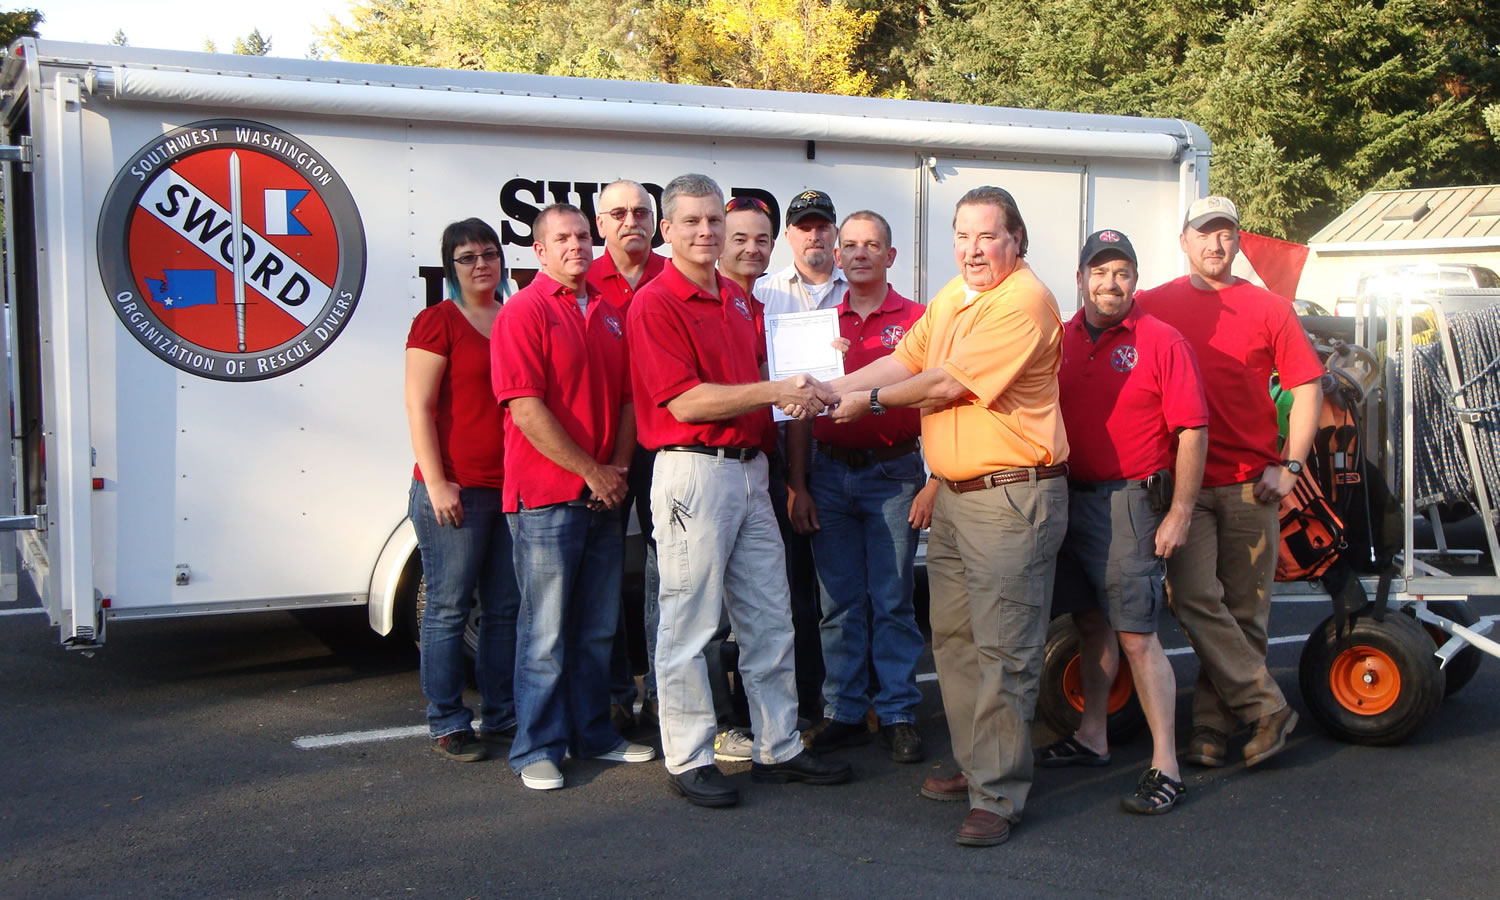 Contributed photo
Georgia-Pacific Camas mill manager Gary Kaiser (right) presents a check for $10,000 to members of the S.W.O.R.D. team including Misty Metz, Tyler McMahon, Larry Wagoner, Tim Woodring, Doug Young, Ron Gray, Jerry Lester, Jim Virgin and Luke McCall.